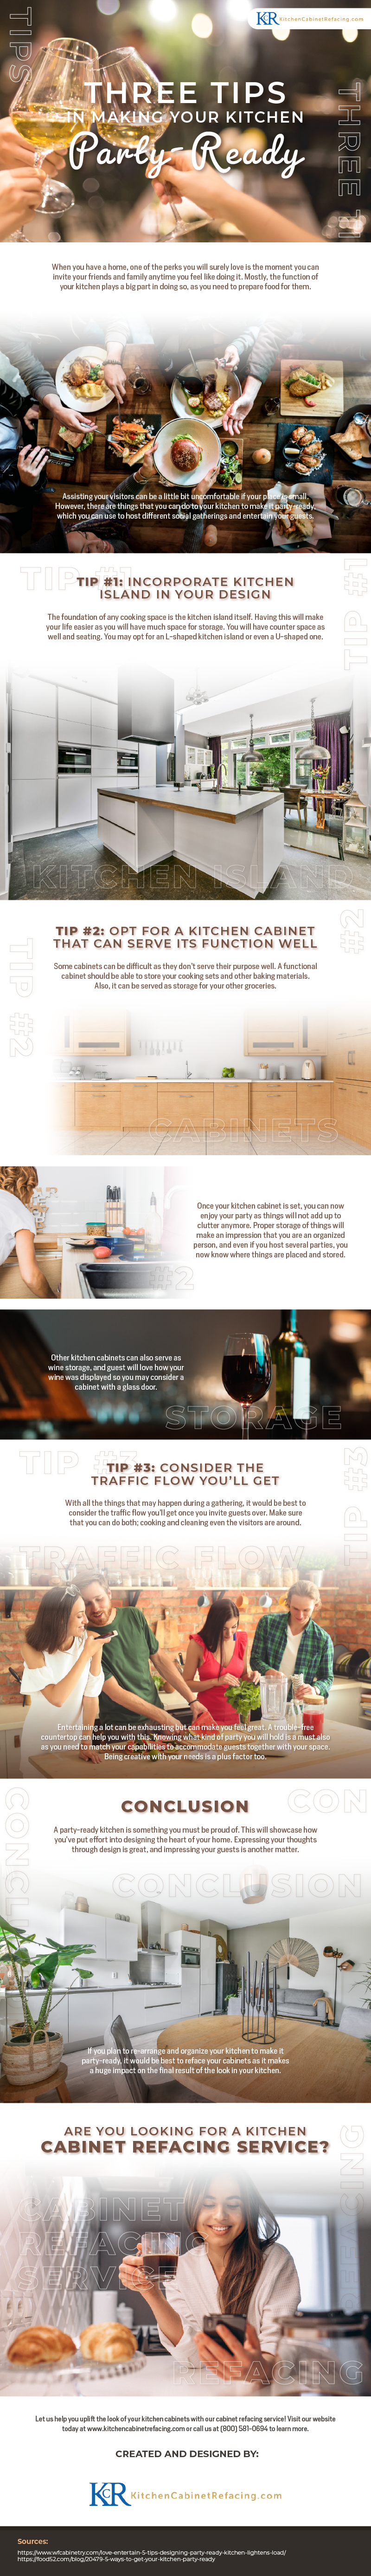 Three_Tips_in_Making_Your_Kitchen_Party_Ready_infographic